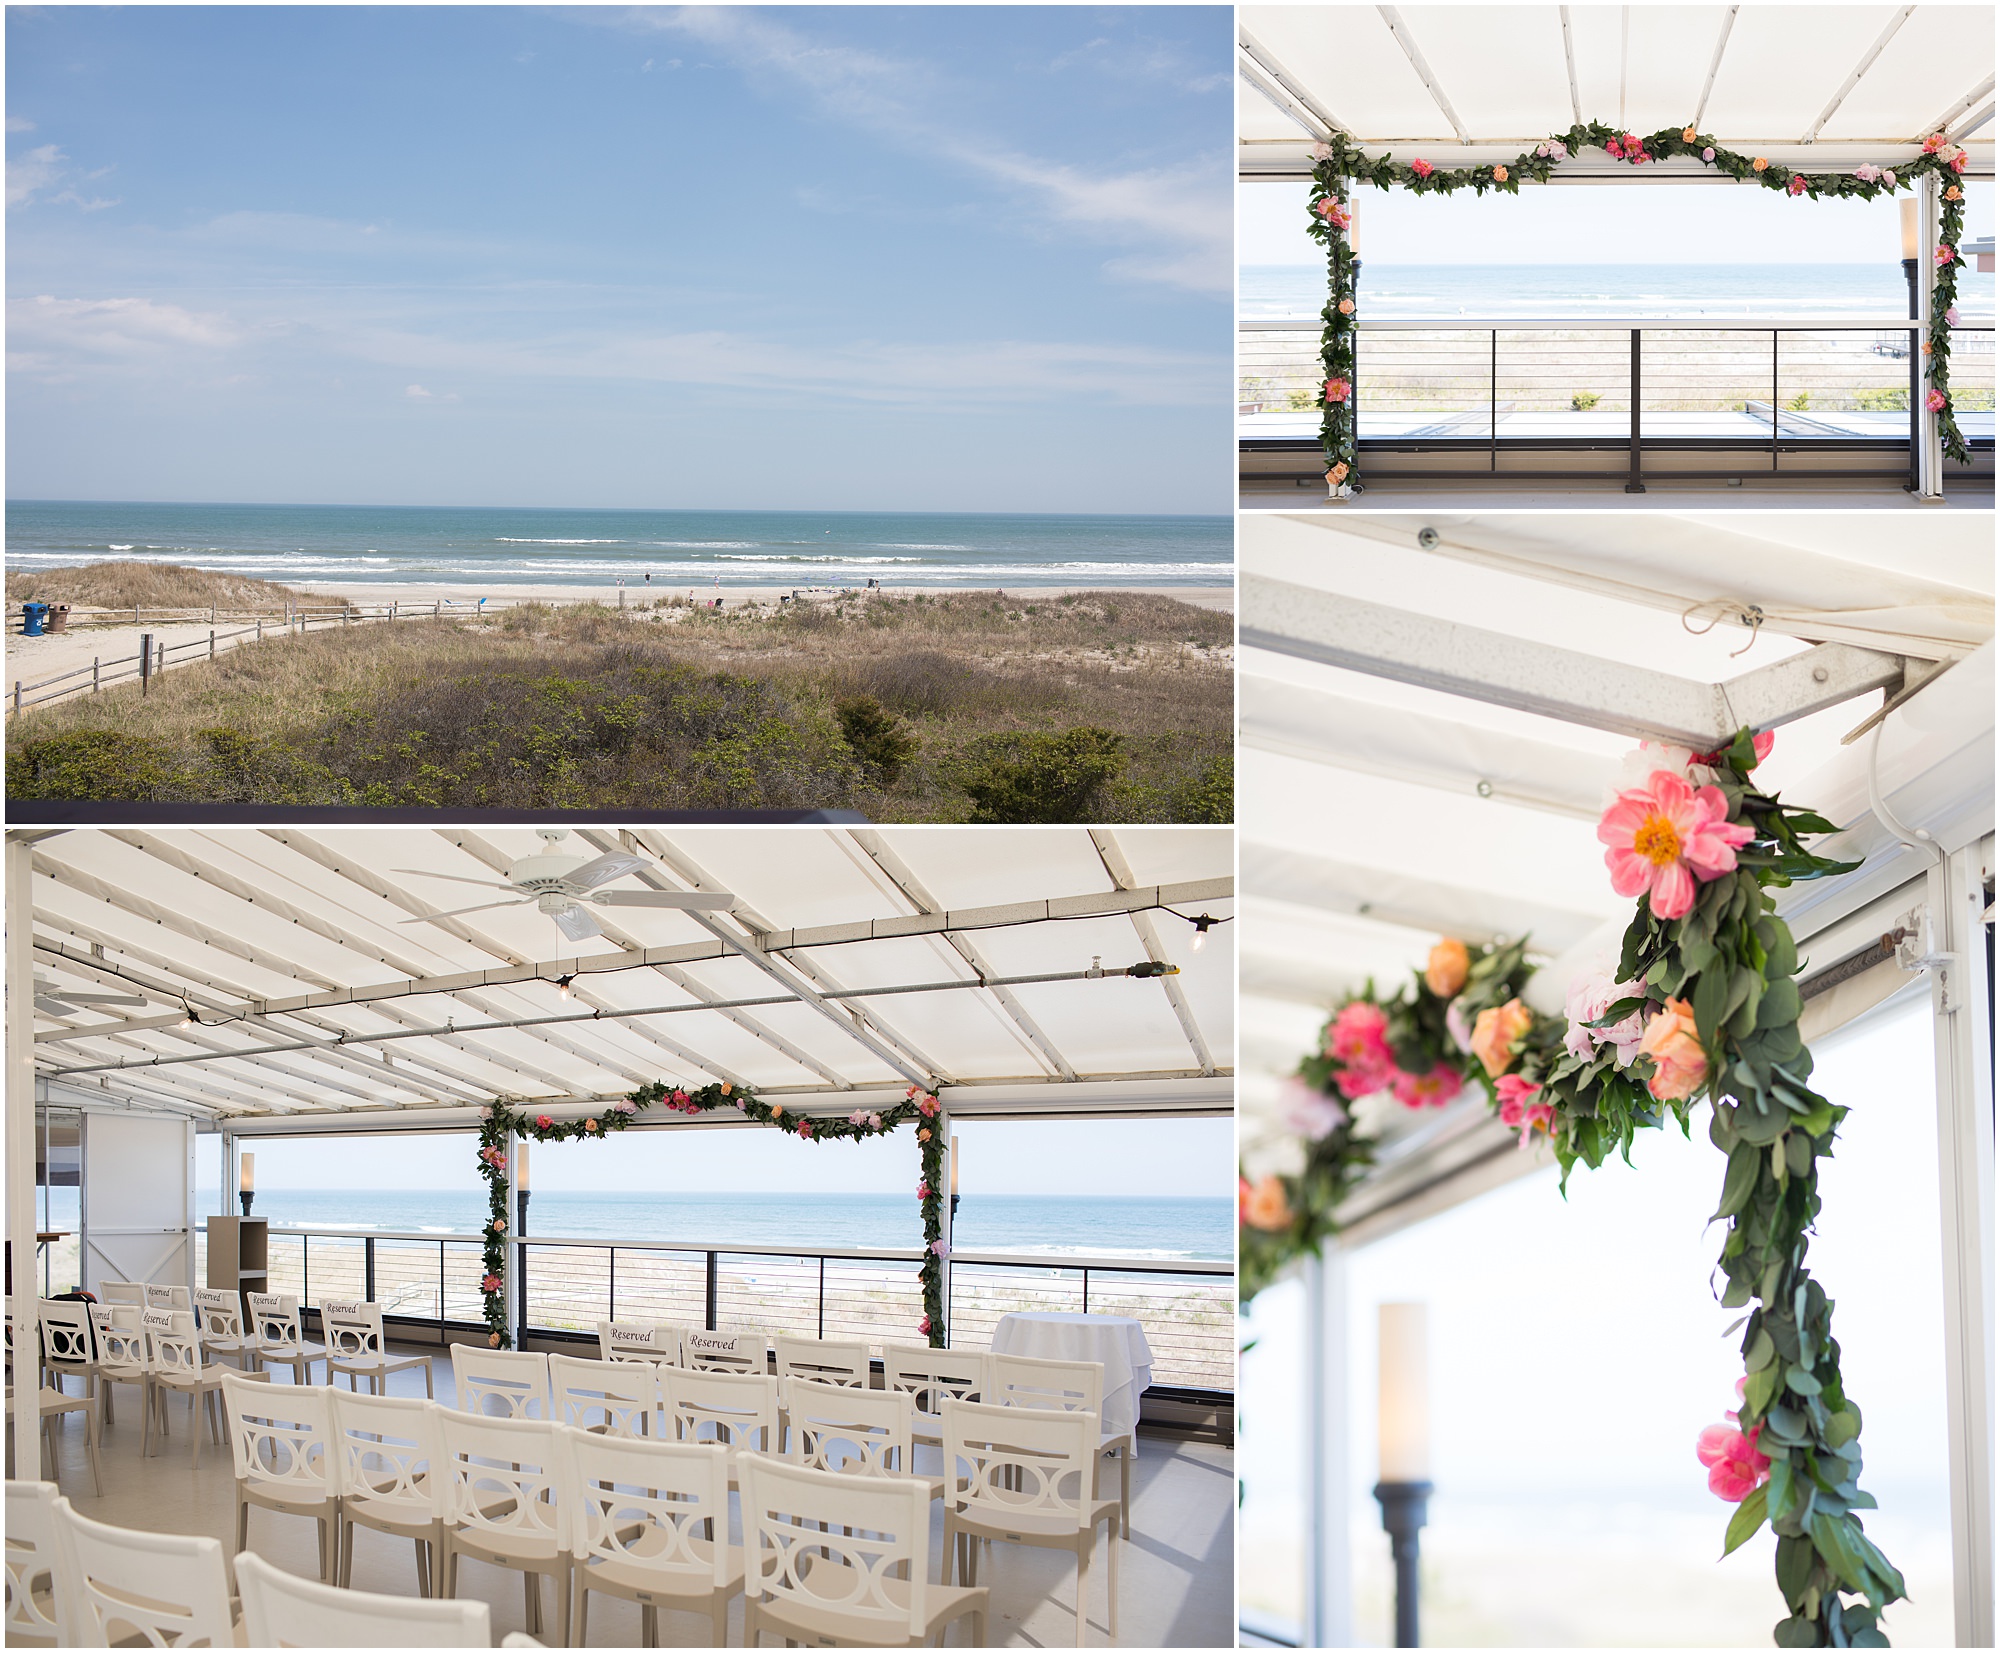 The indoor ceremony space overlooking the ocean at the Windrift Hotel in Avalon makes it the best Jersey Shore wedding venue